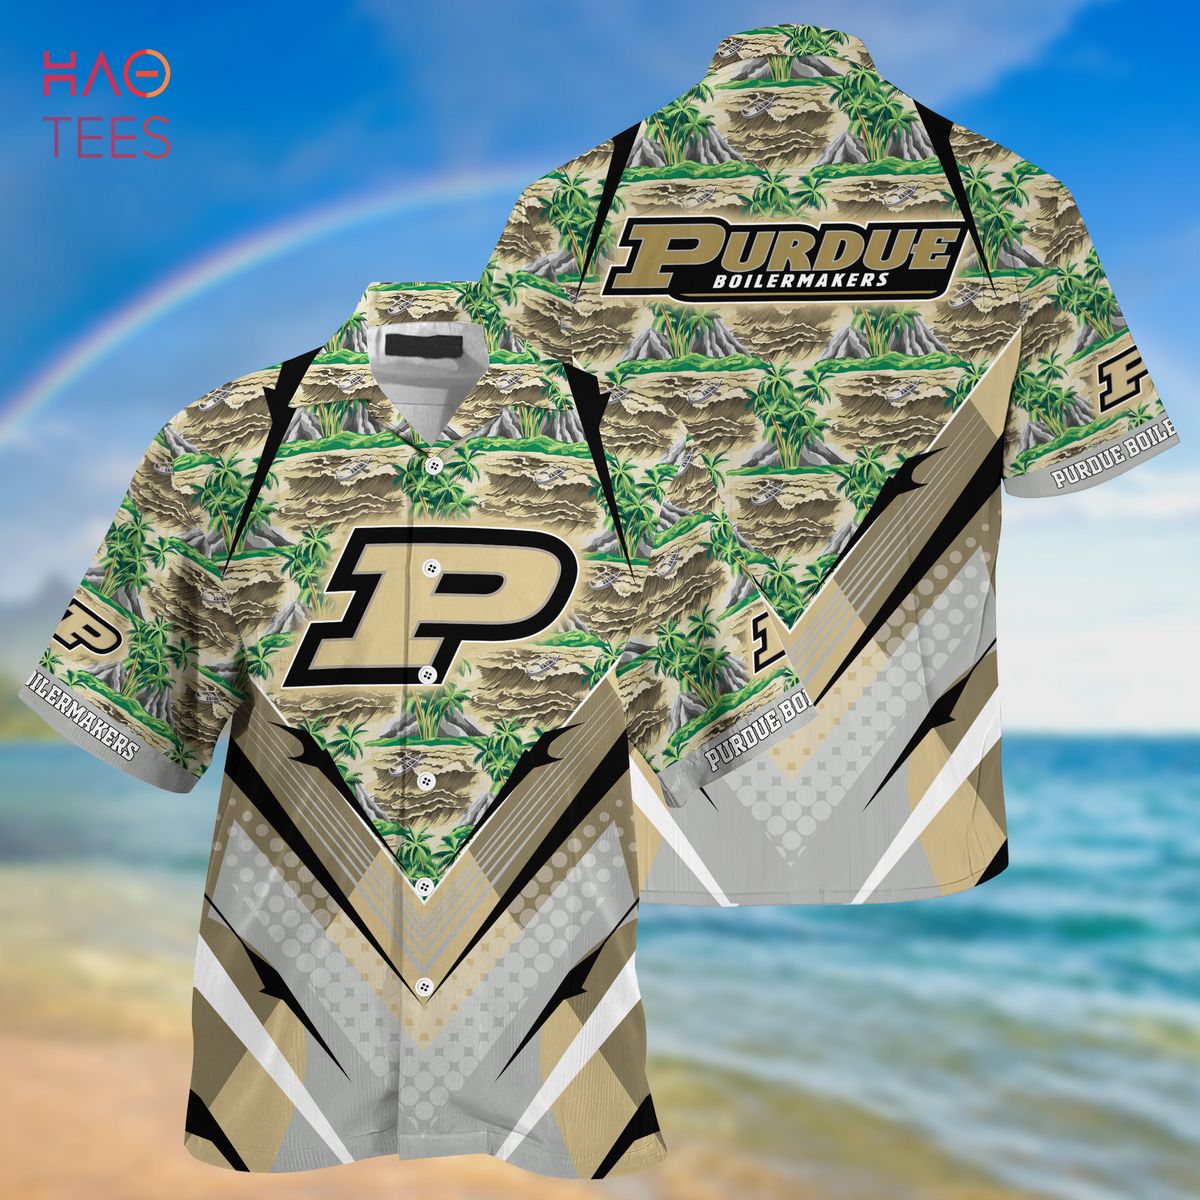 [TRENDING] Purdue Boilermakers Summer Hawaiian Shirt And Shorts, For Sports Fans This Season